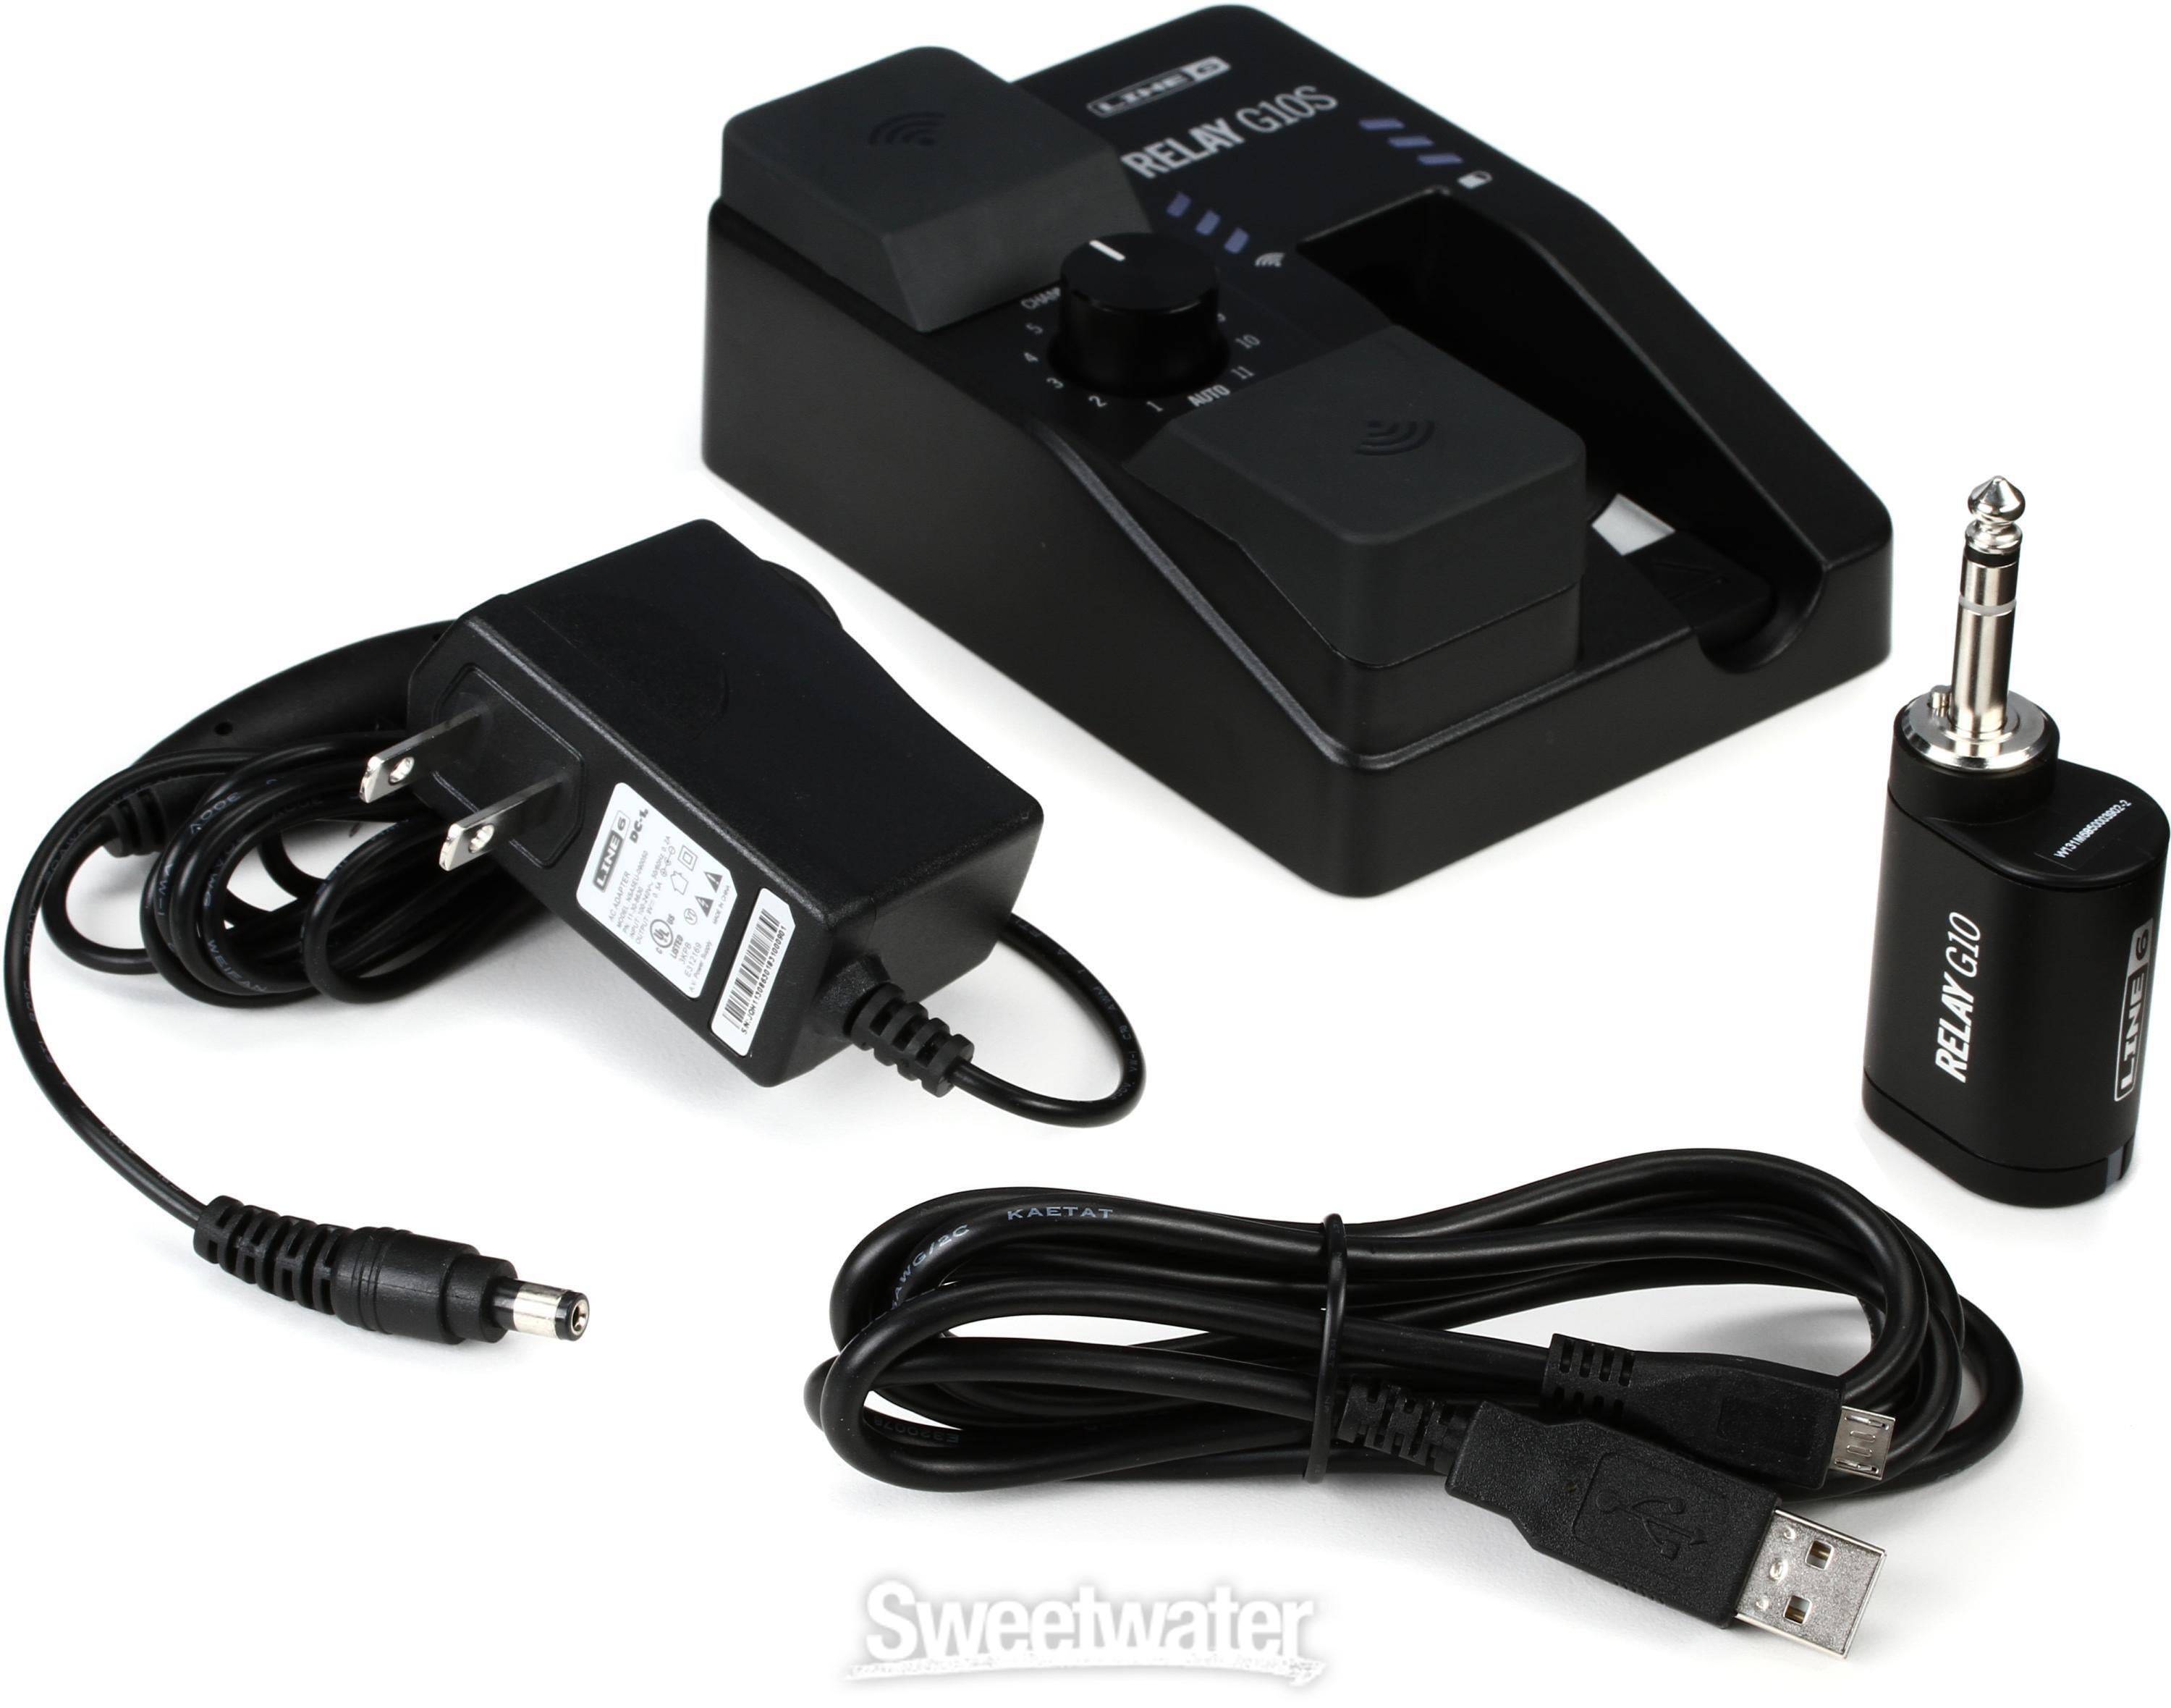 Line 6 Relay G10S Digital Wireless Guitar System Reviews | Sweetwater